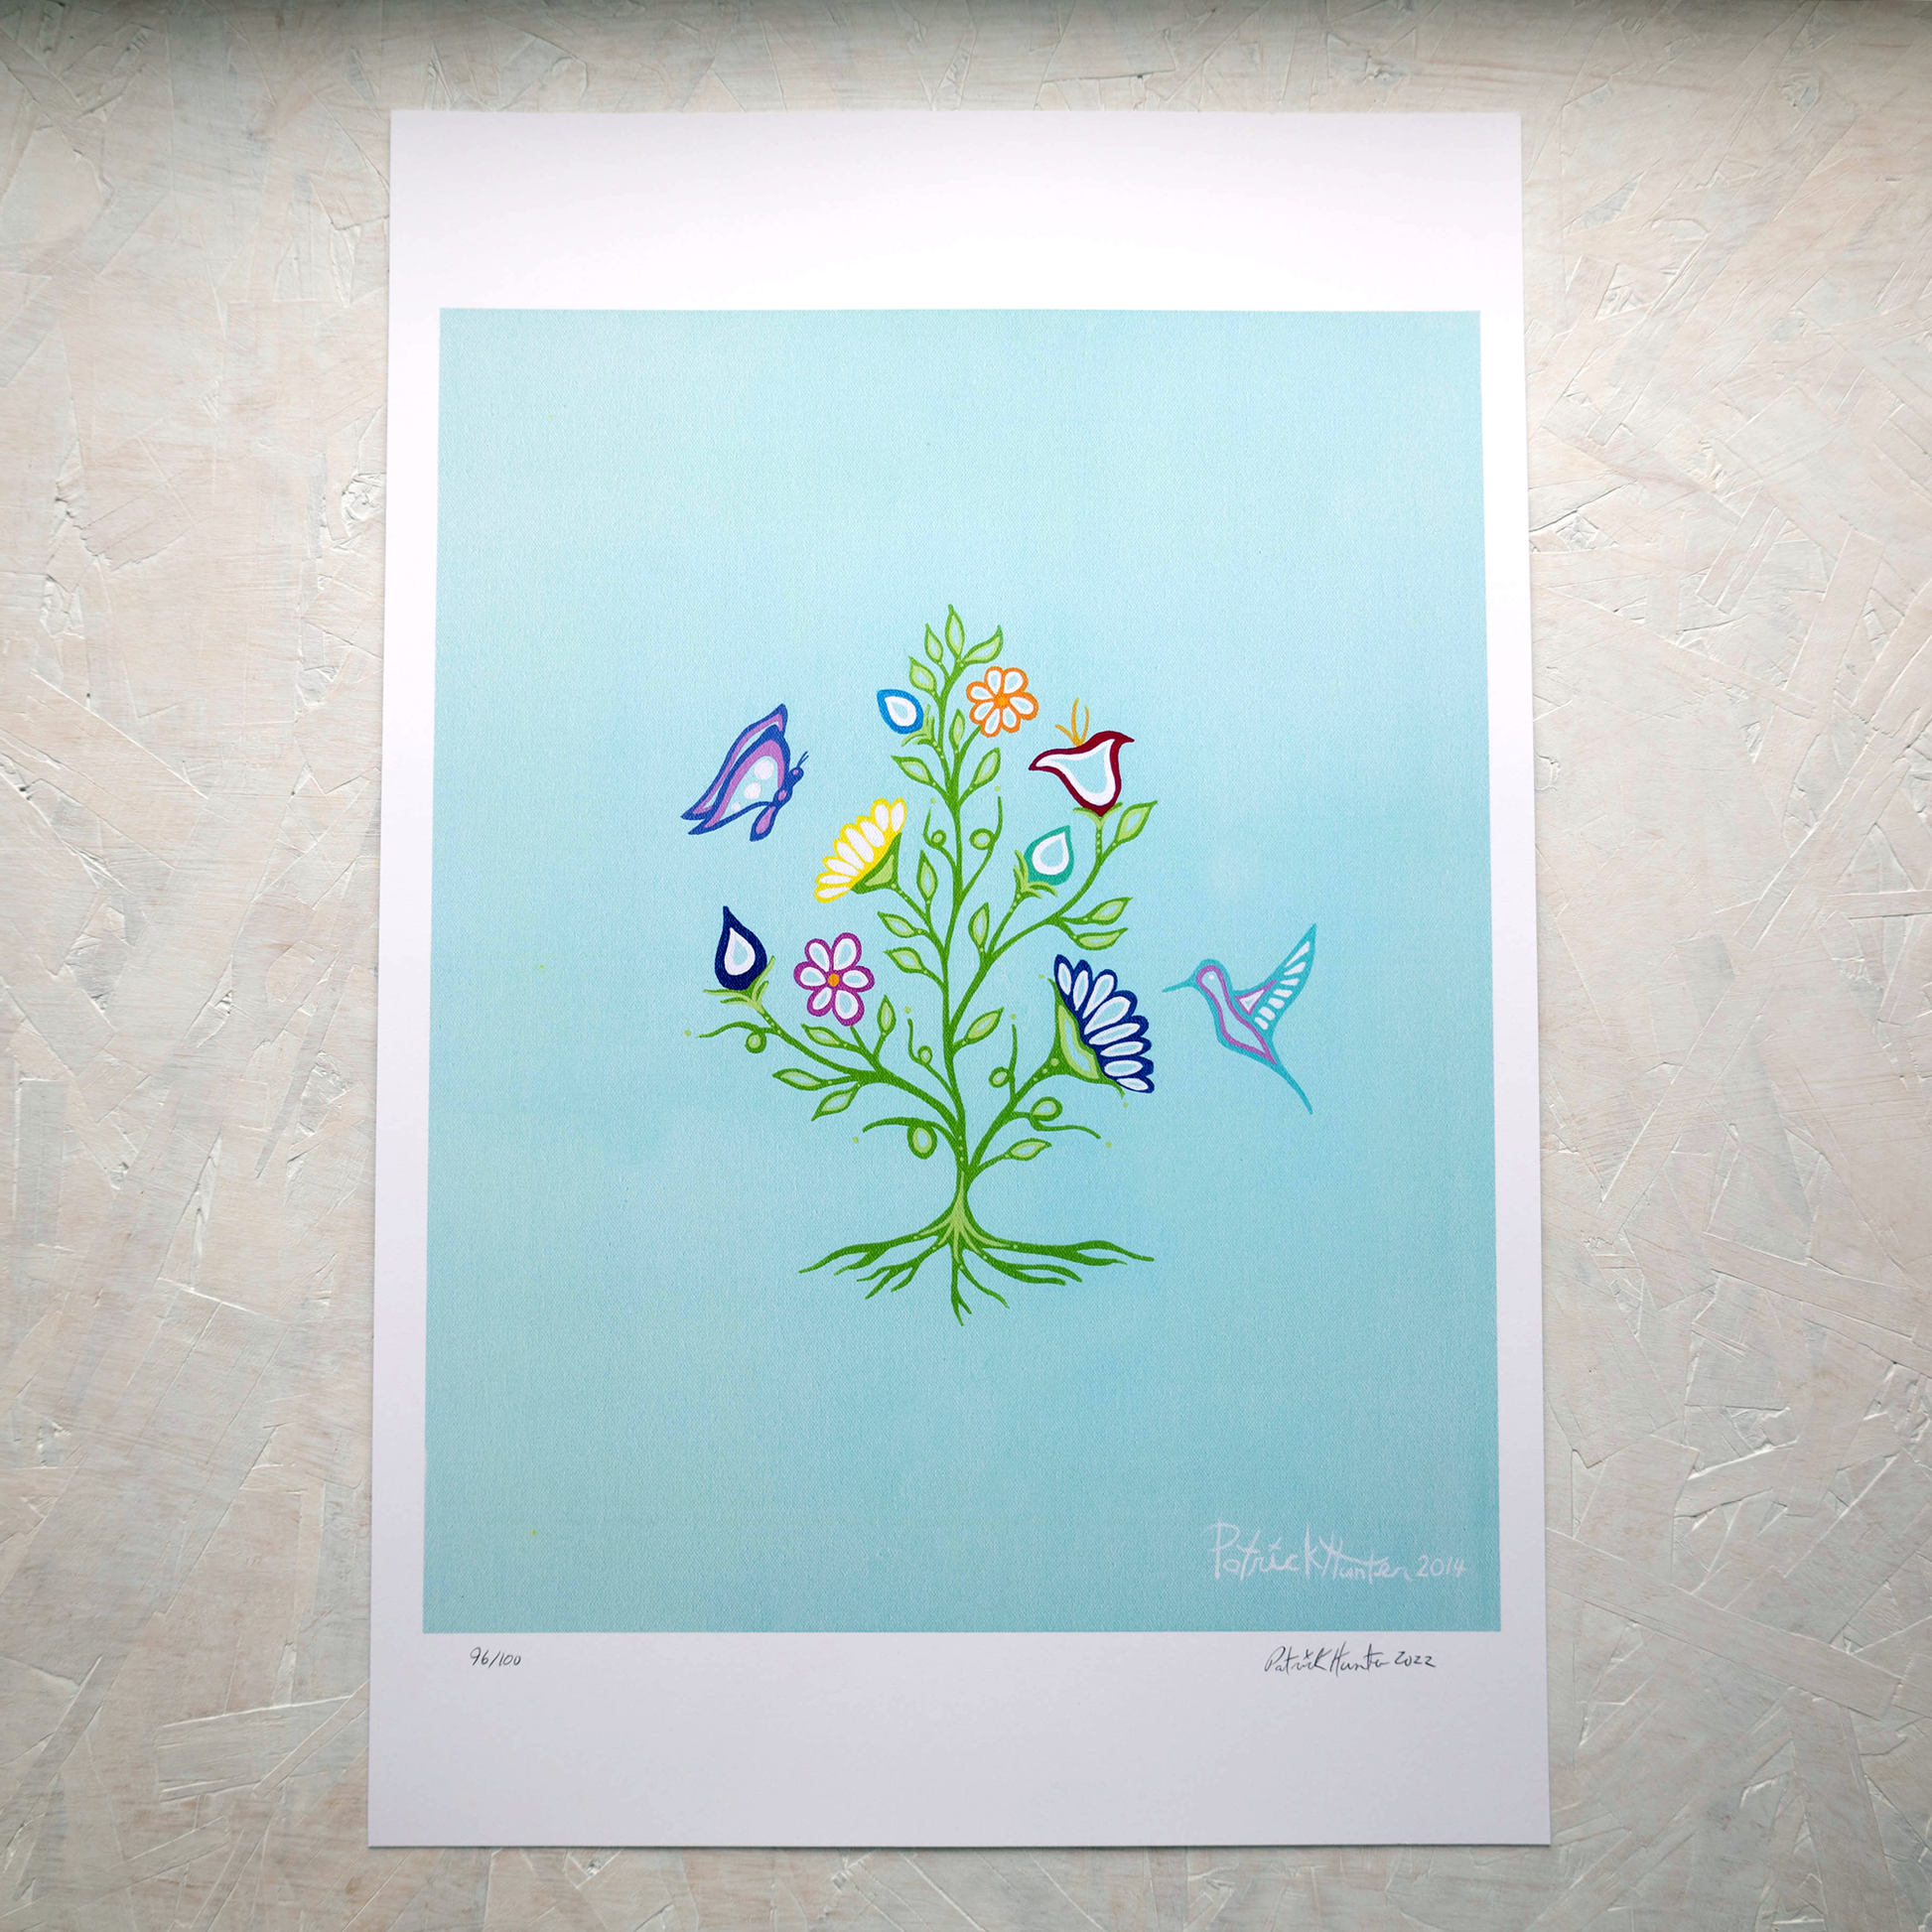 Print of Patrick Hunter's painting of flowers and polinators in woodland art style on light blue background.